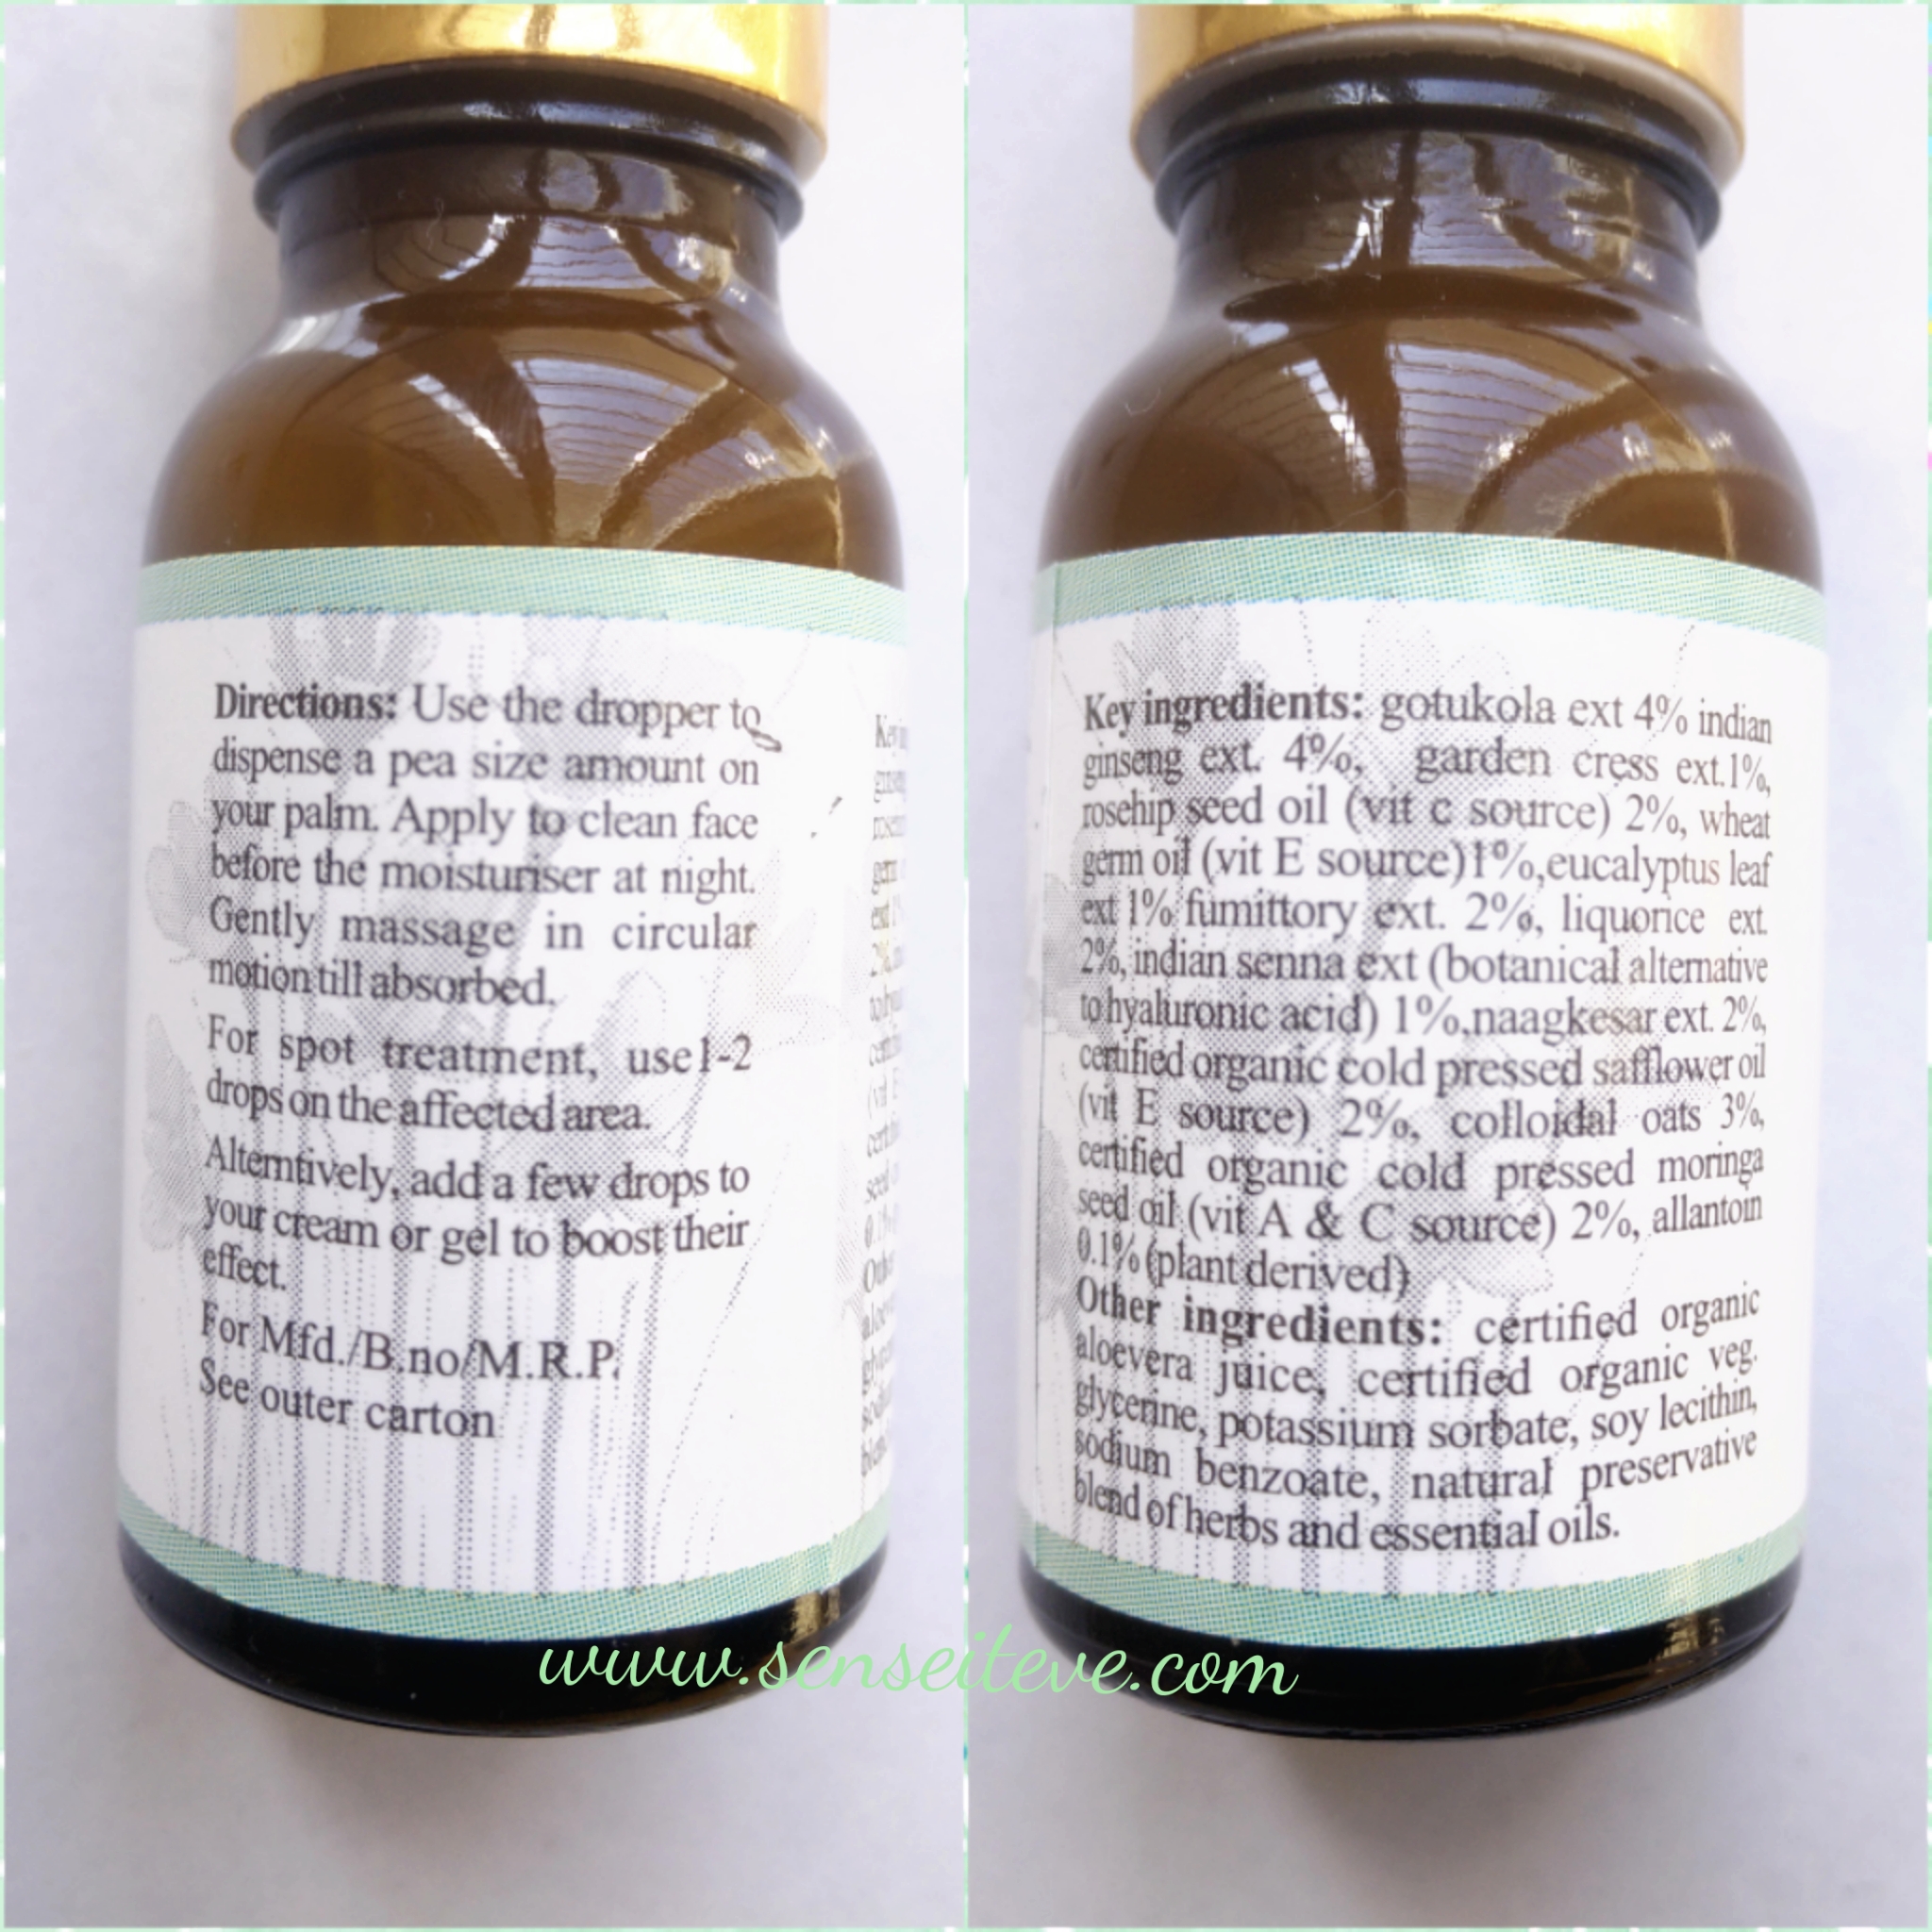 Just Herbs Rejuvenating Beauty Elixir Facial Serum Ingredients & Directions to use